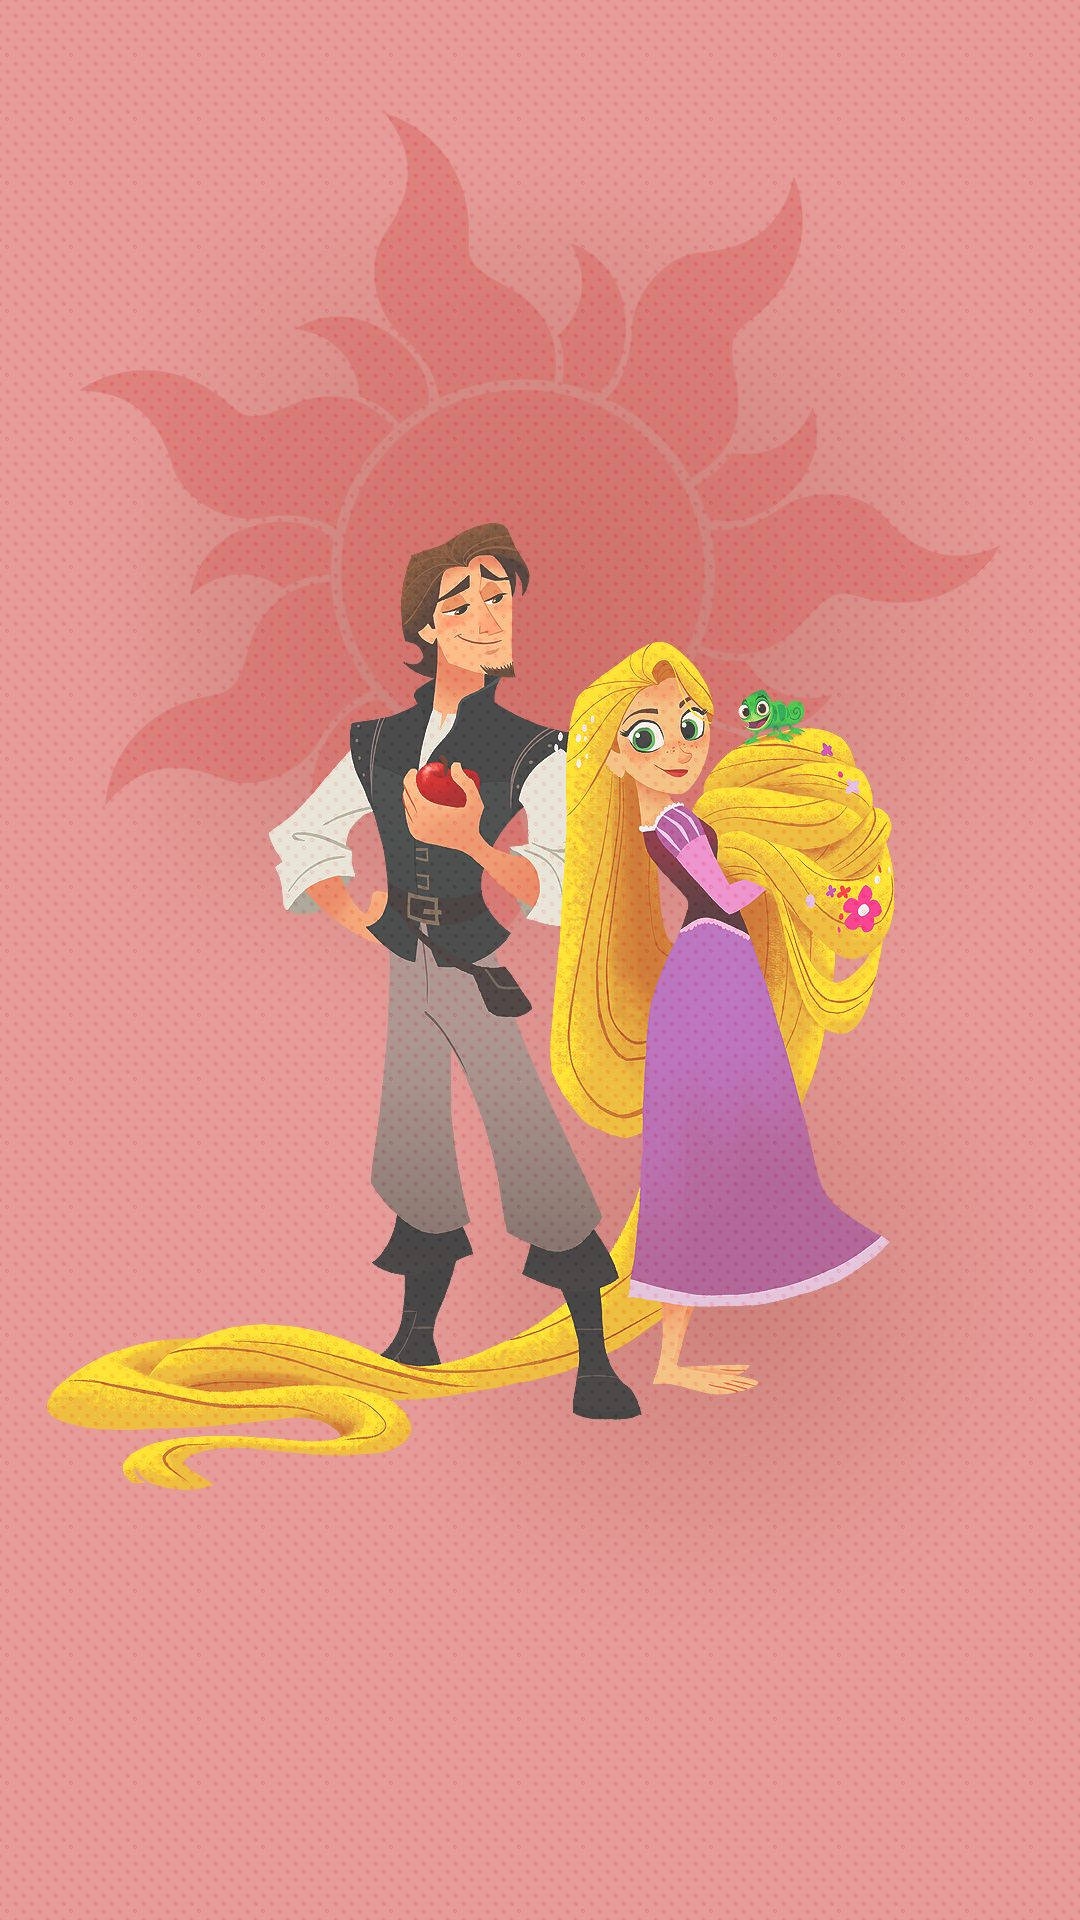 A cartoon of two people standing together - Princess, Rapunzel